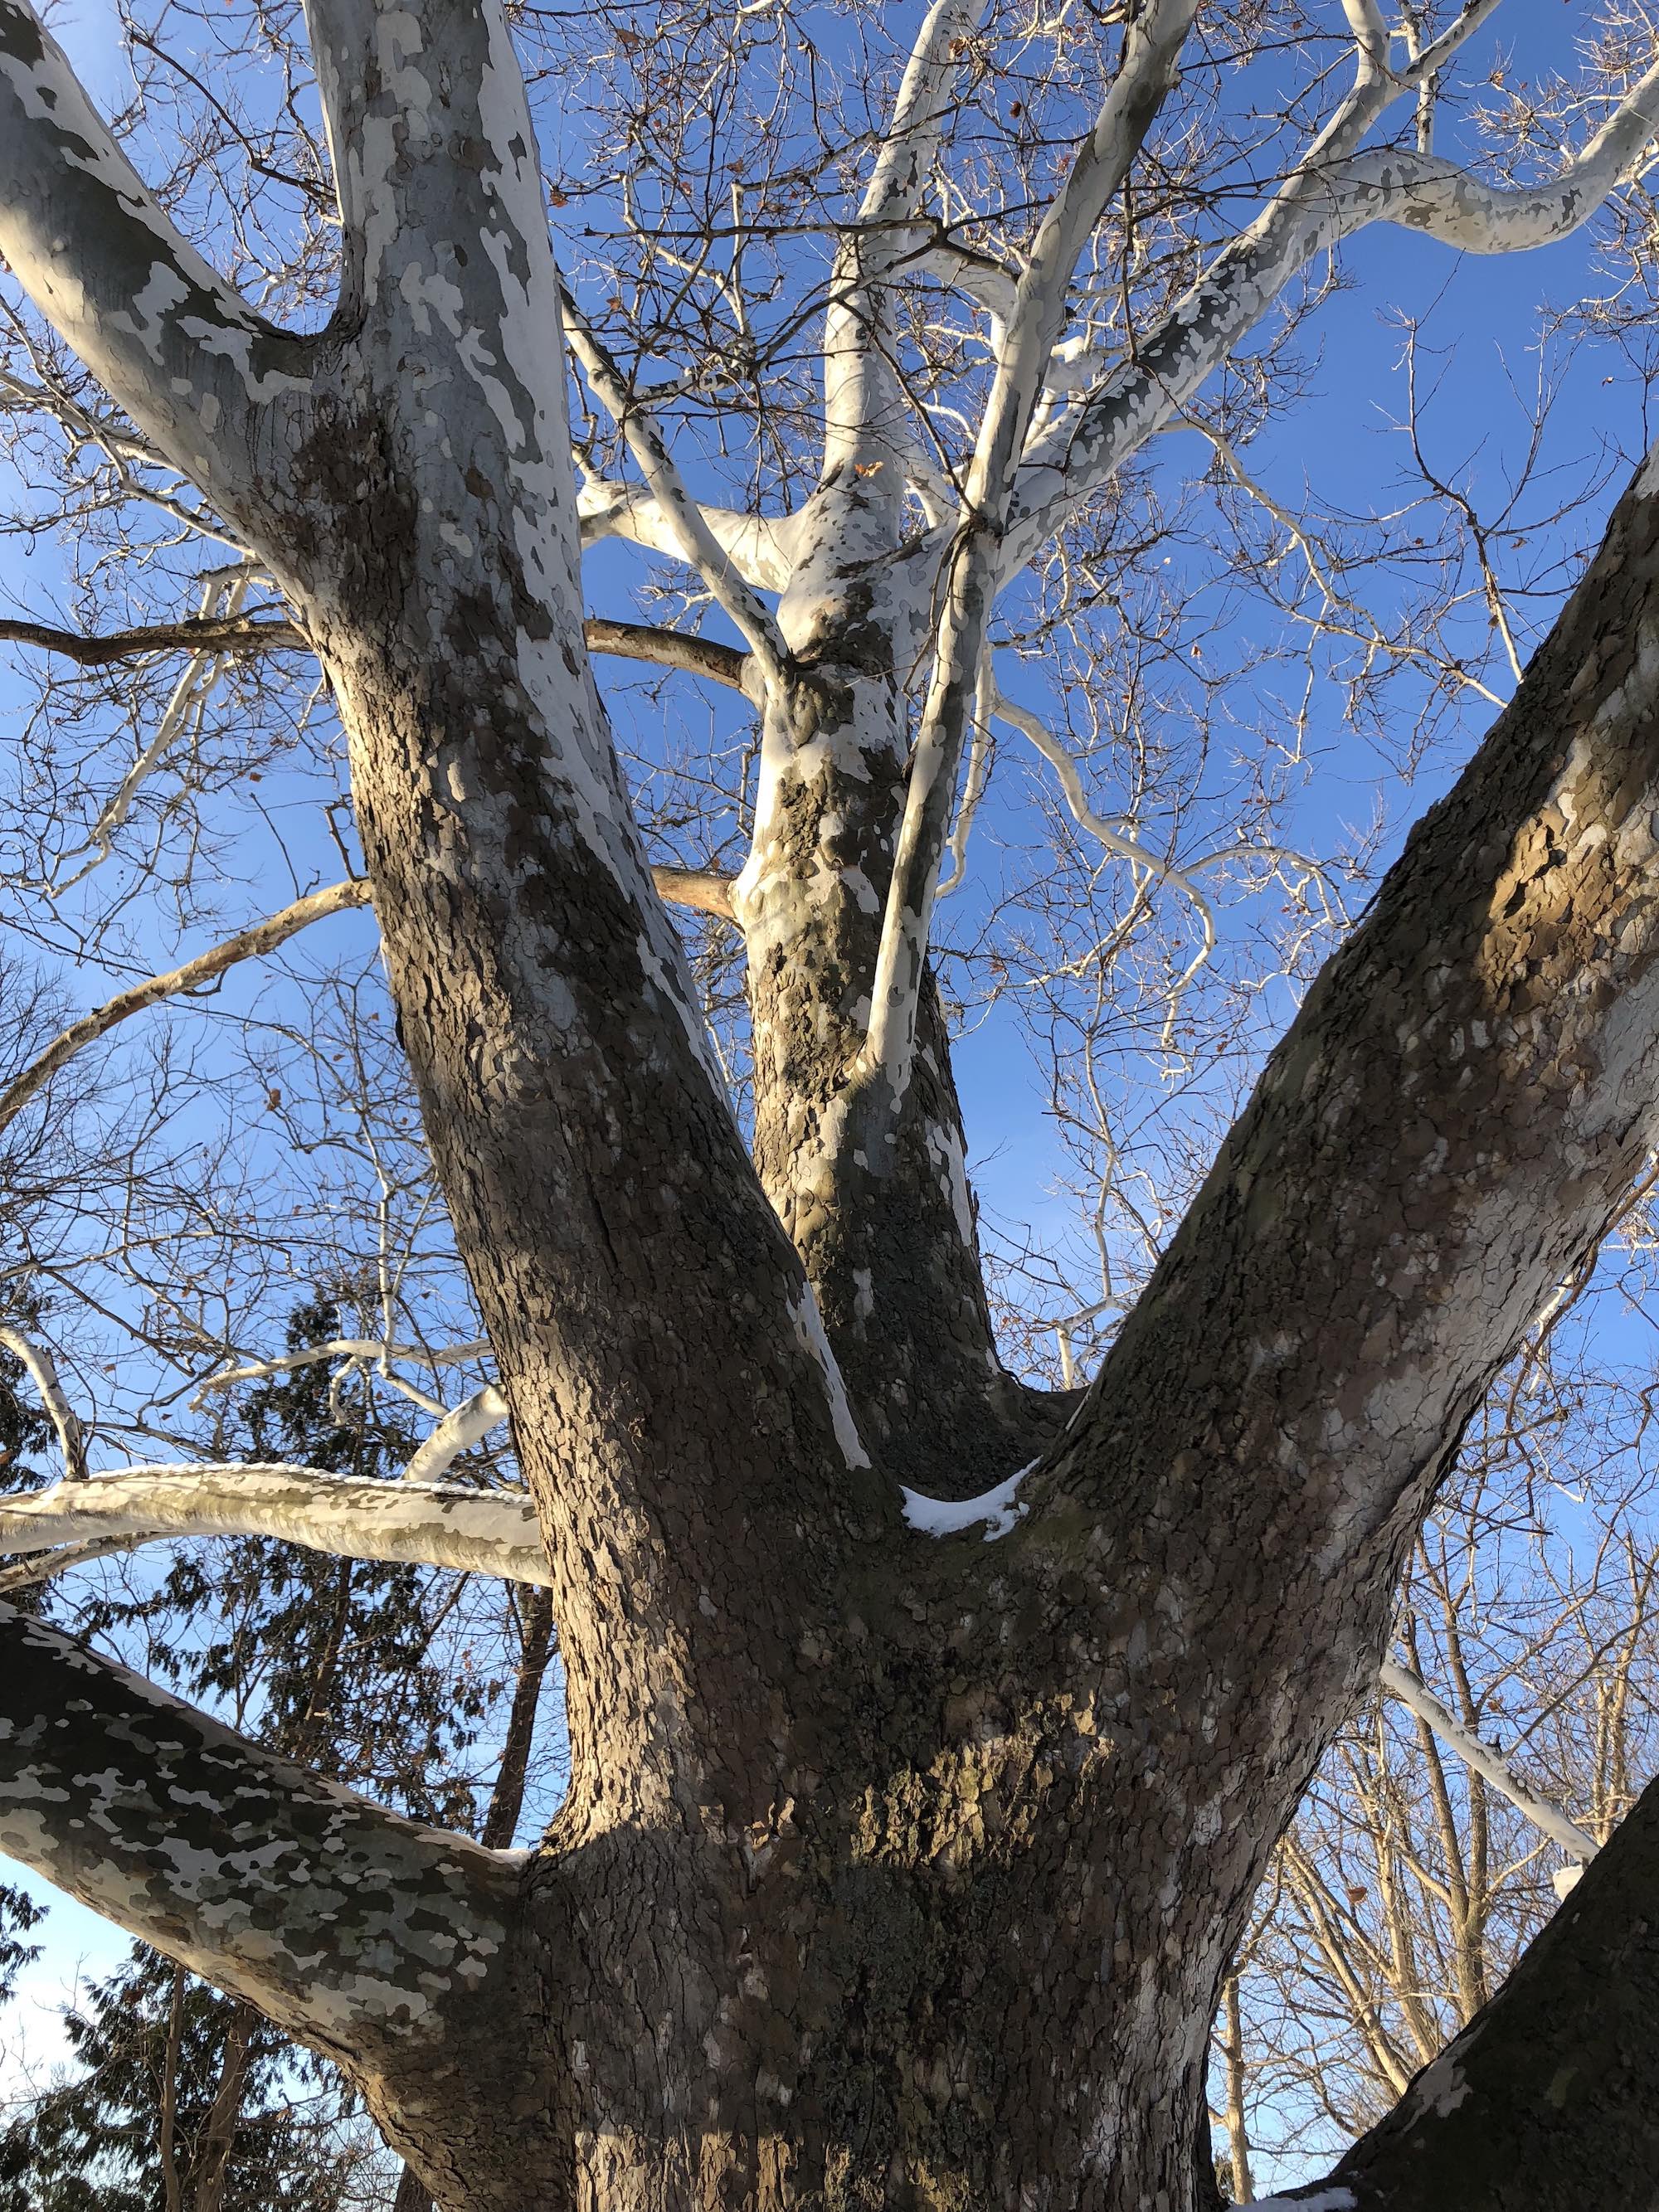 Sycamore tree between Ho-Nee-Um Pond and Arbor Drive on north shore of Lake Wingra on March 7, 2018.